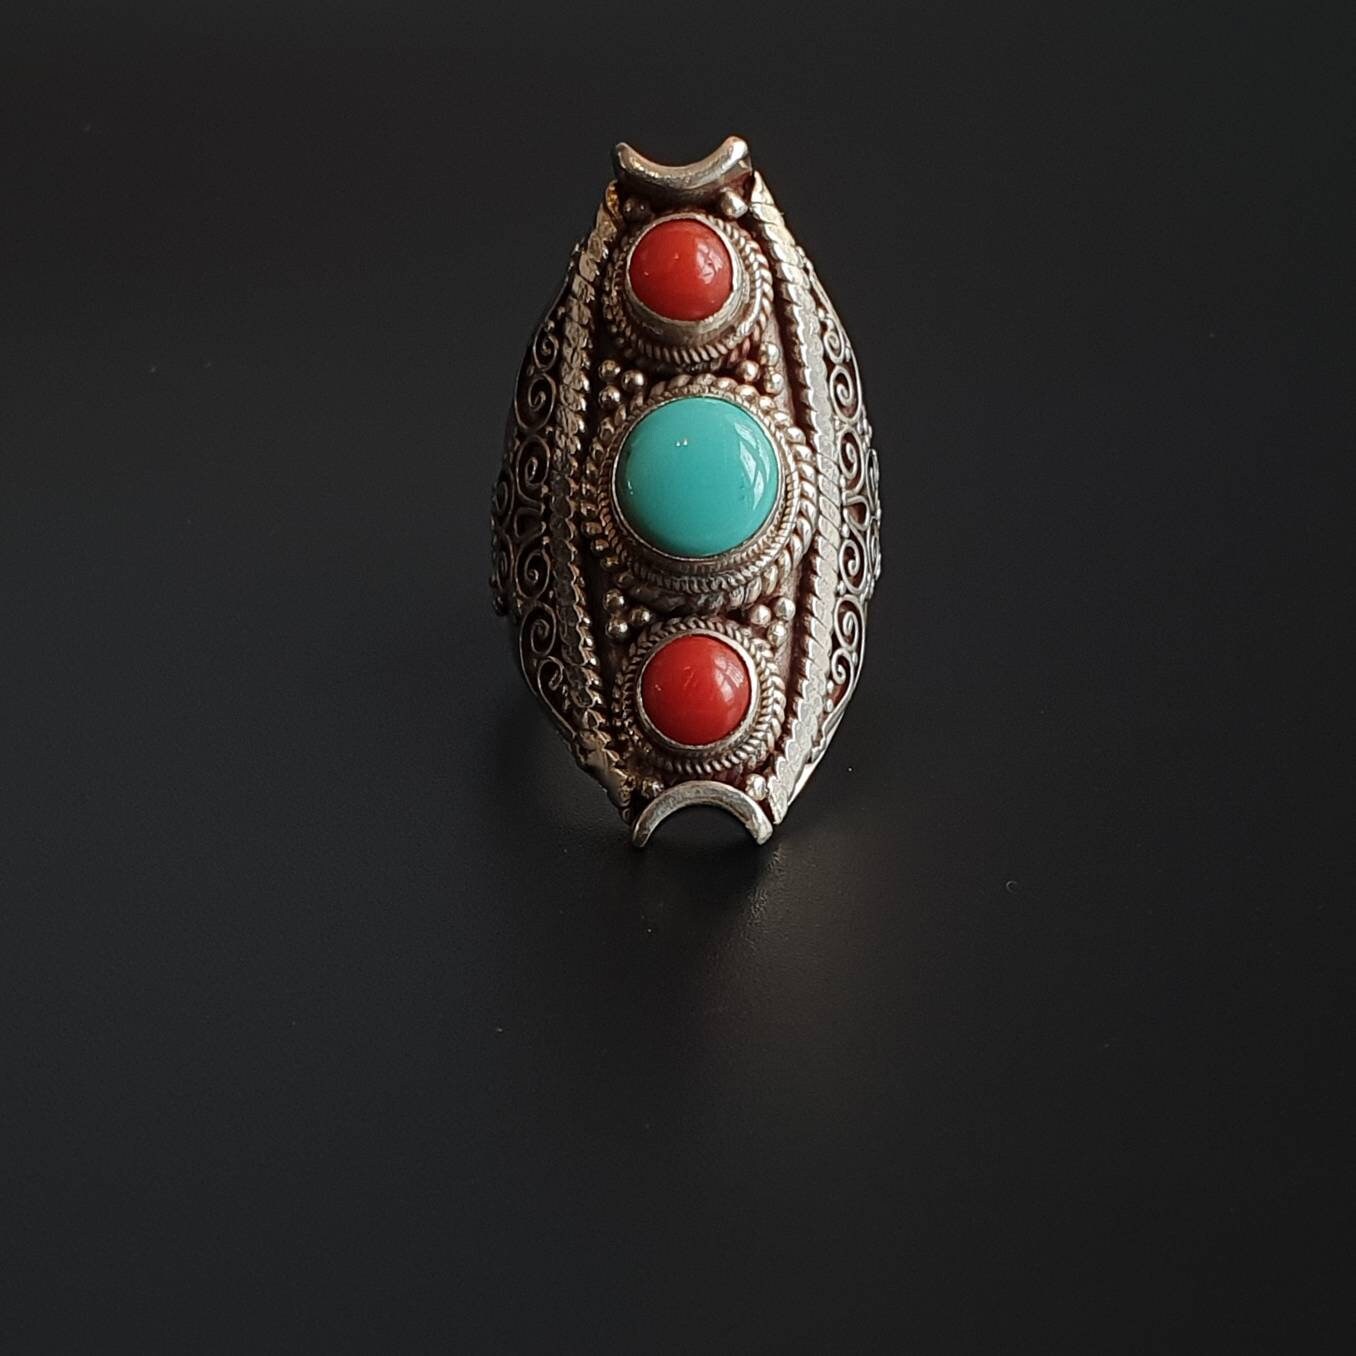 Ring, Ethnic, Tribal, Vintage, Handmade, Unique, Antique, Jewellery, Sterling Silver ring, Statement Ring,Multi Stone ring,Gifts